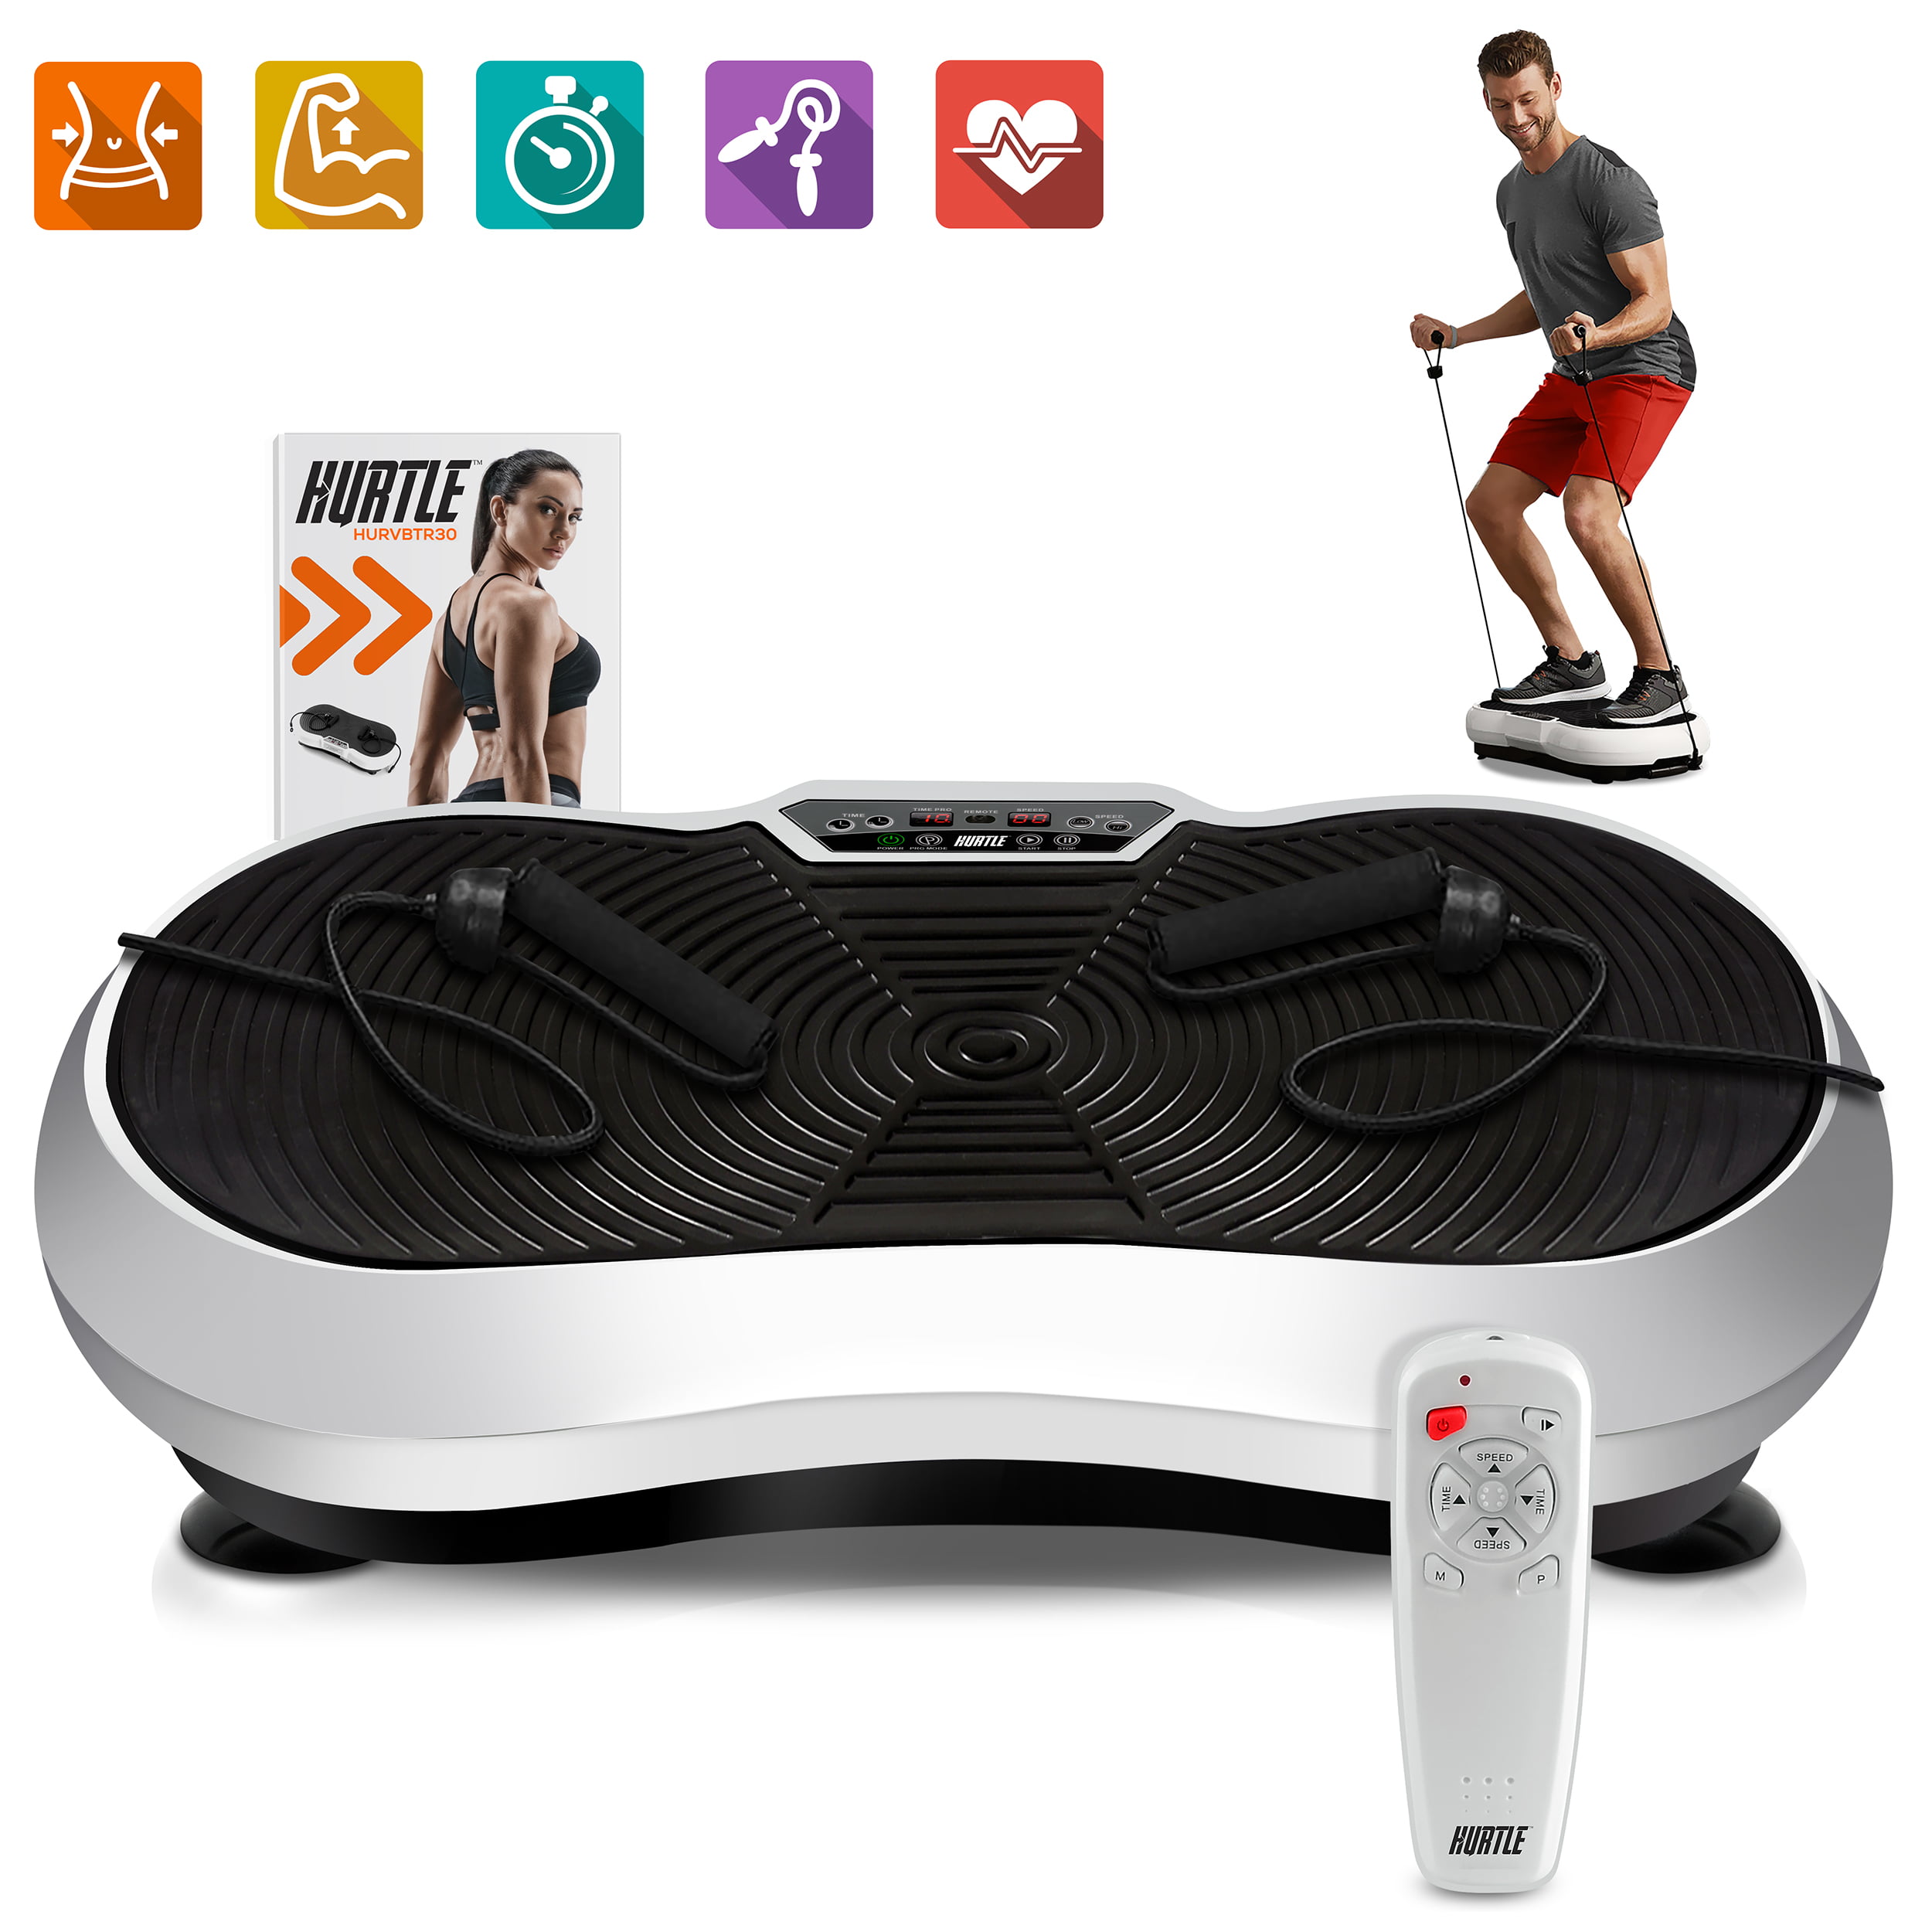 MUCHOO Vibration Plate Fitness Machine Whole Body Workout Platform Machine w/Loop Bands Body Slimmer Weight Loss and Home Training & Exercise